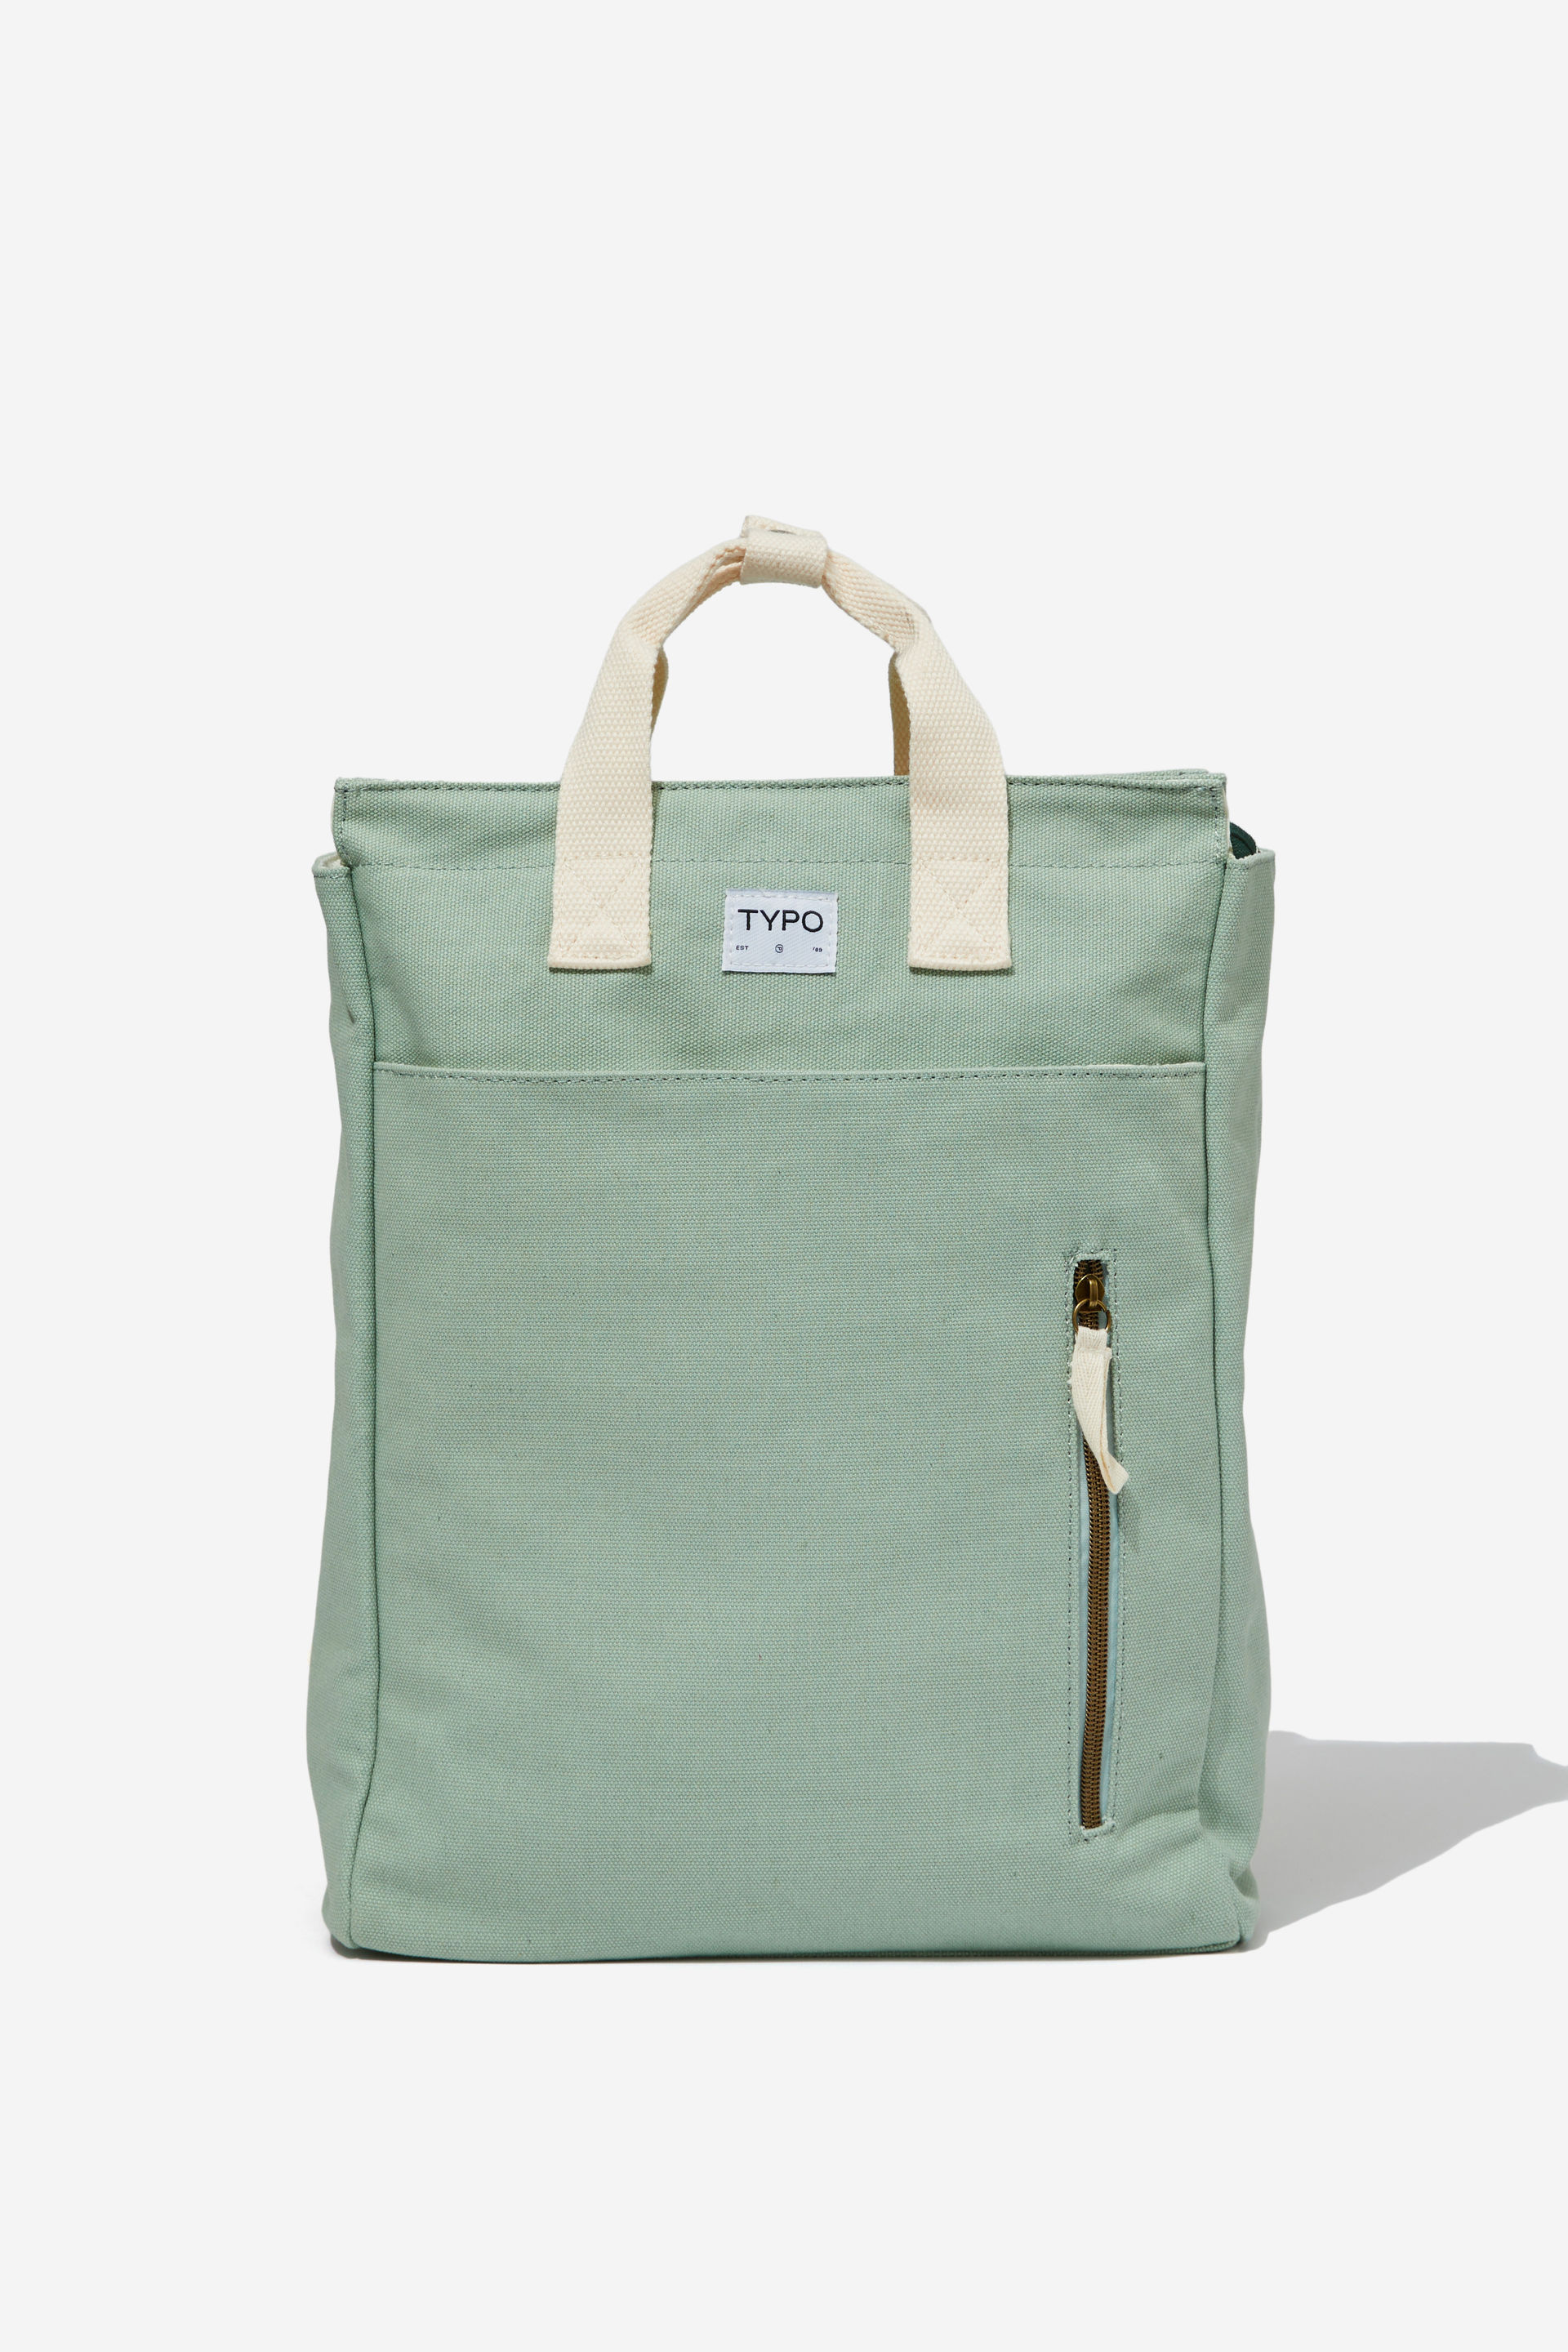 Typo - Got Your Back Tote Backpack - Smoke green